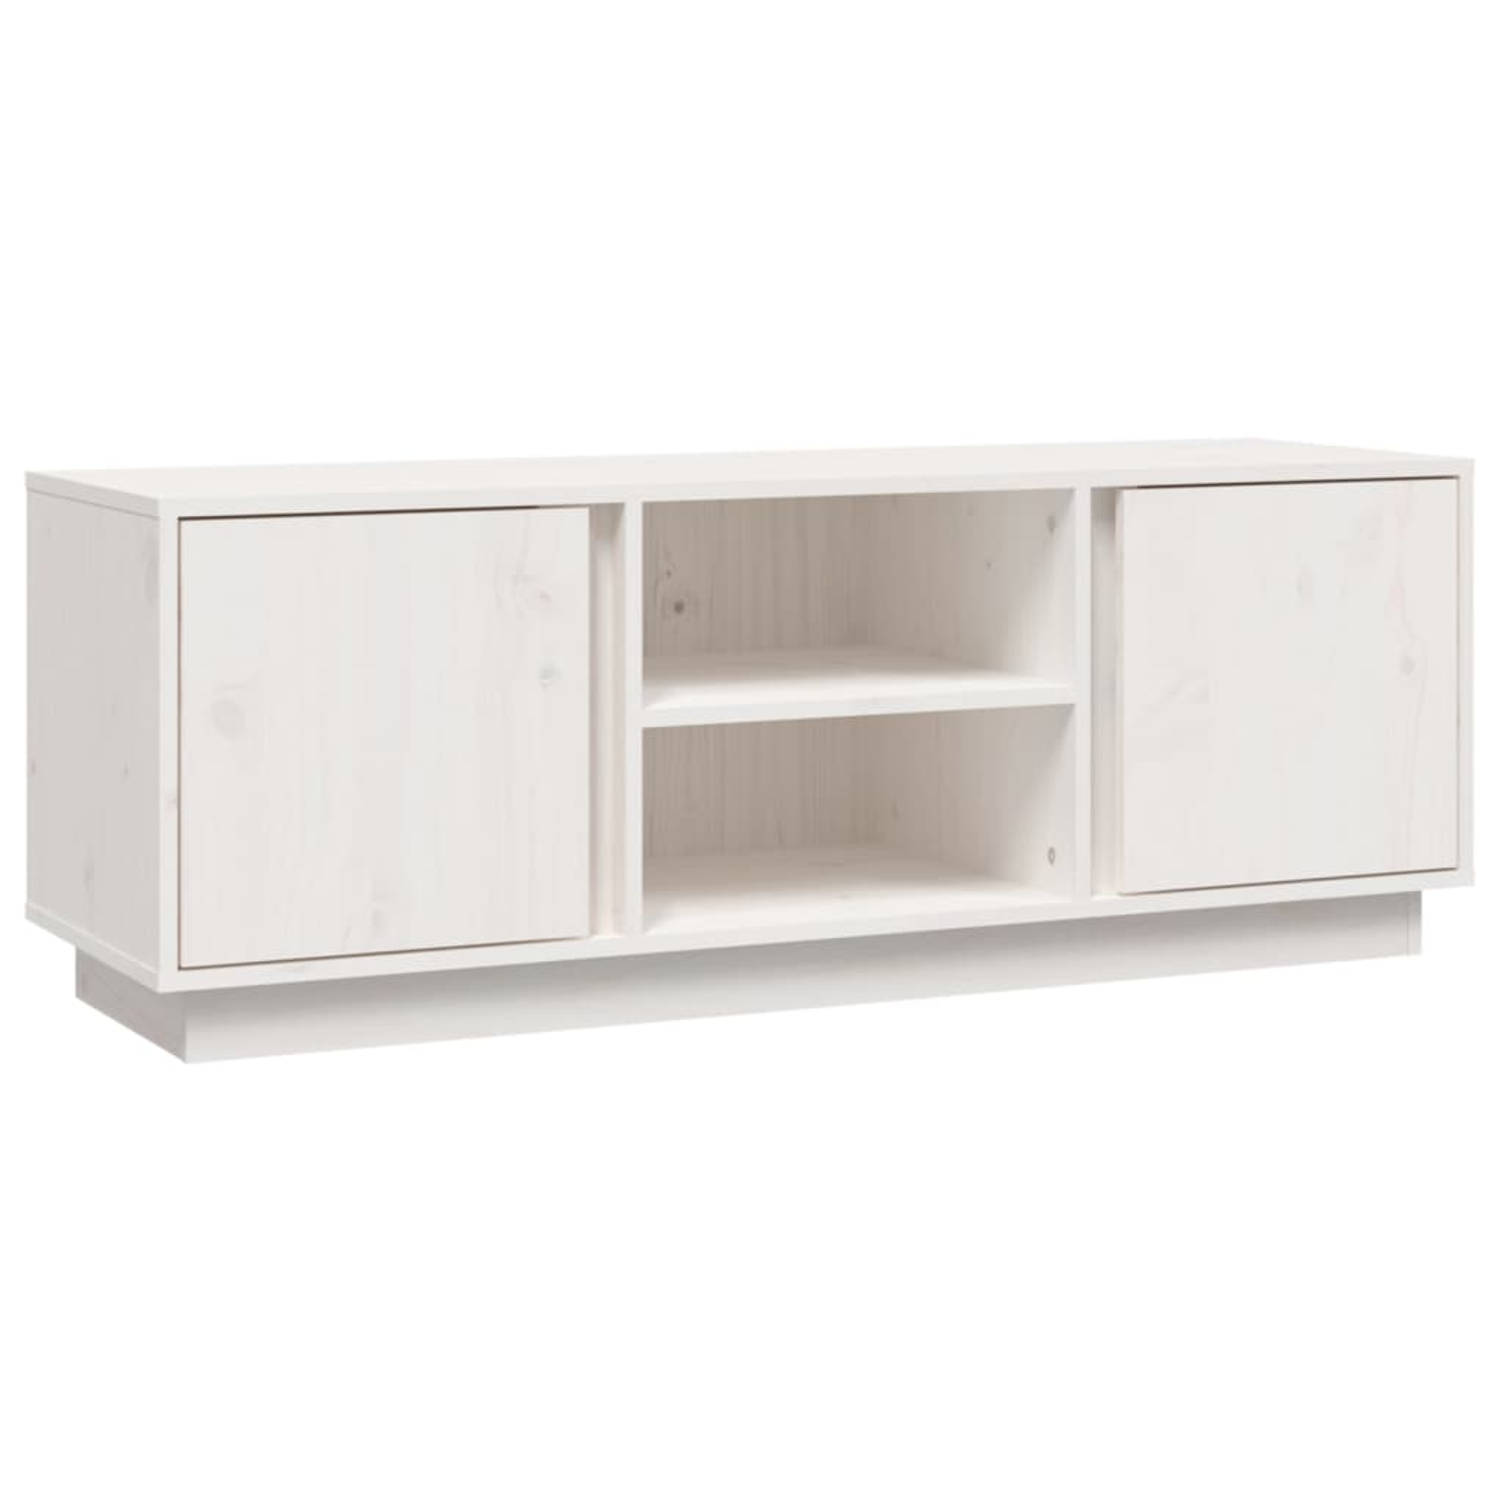 The Living Store Tv-kast Grenenhout Wit 110 x 35 x 40.5 cm